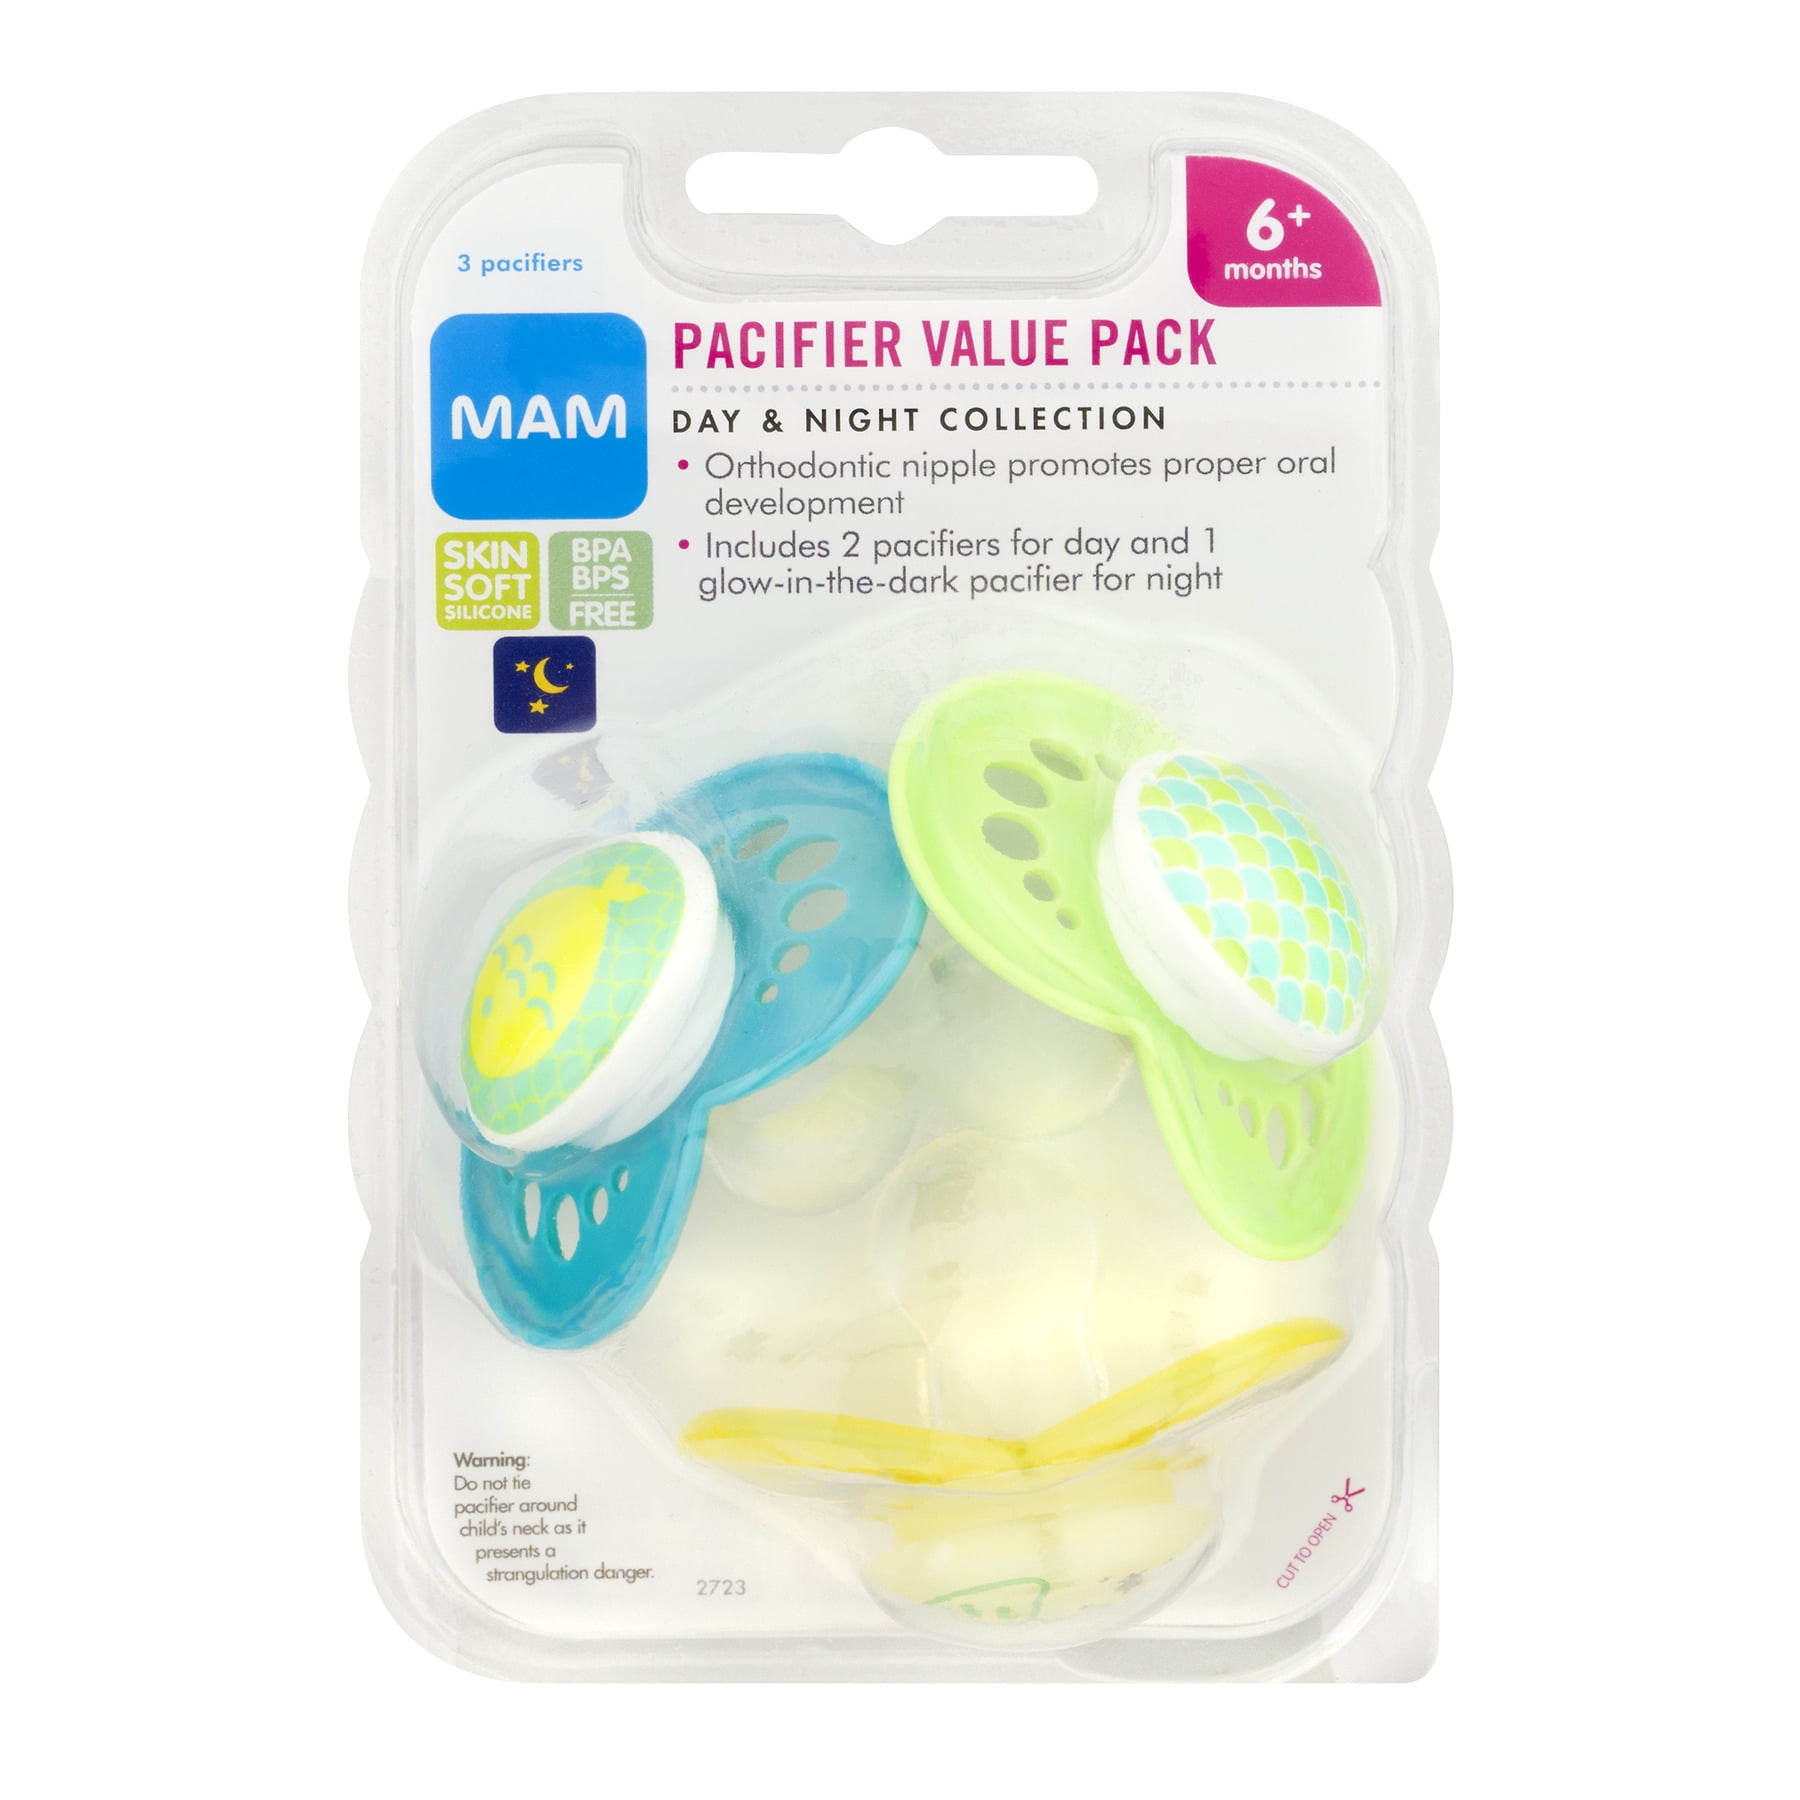 Whale/Lobster Tooth-Friendly Dummy MAM Original Silicone Dummies in a Set of 2 Baby Dummy Made of Special MAM SkinSoft Silicone with Dummy Box 0-6 Months